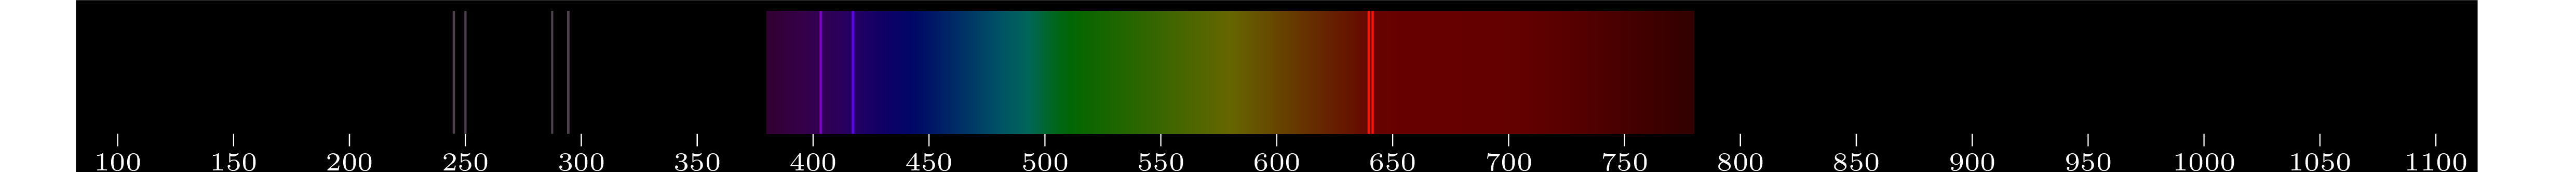 emmision spectra of element Ga